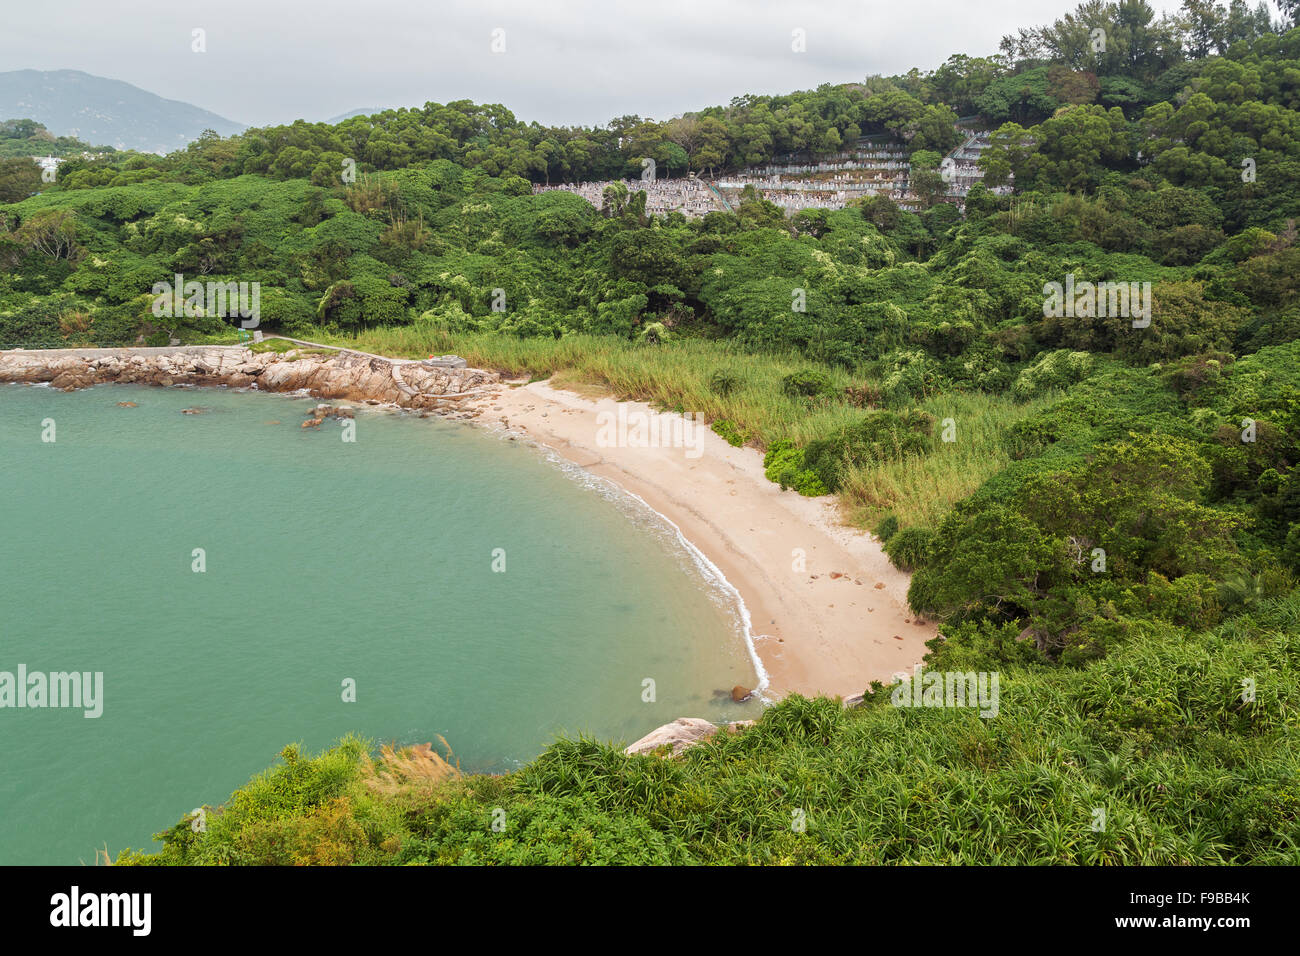 Deserted beach at the Cheung Chau Island in Hong Kong, China, viewed from above. Stock Photo